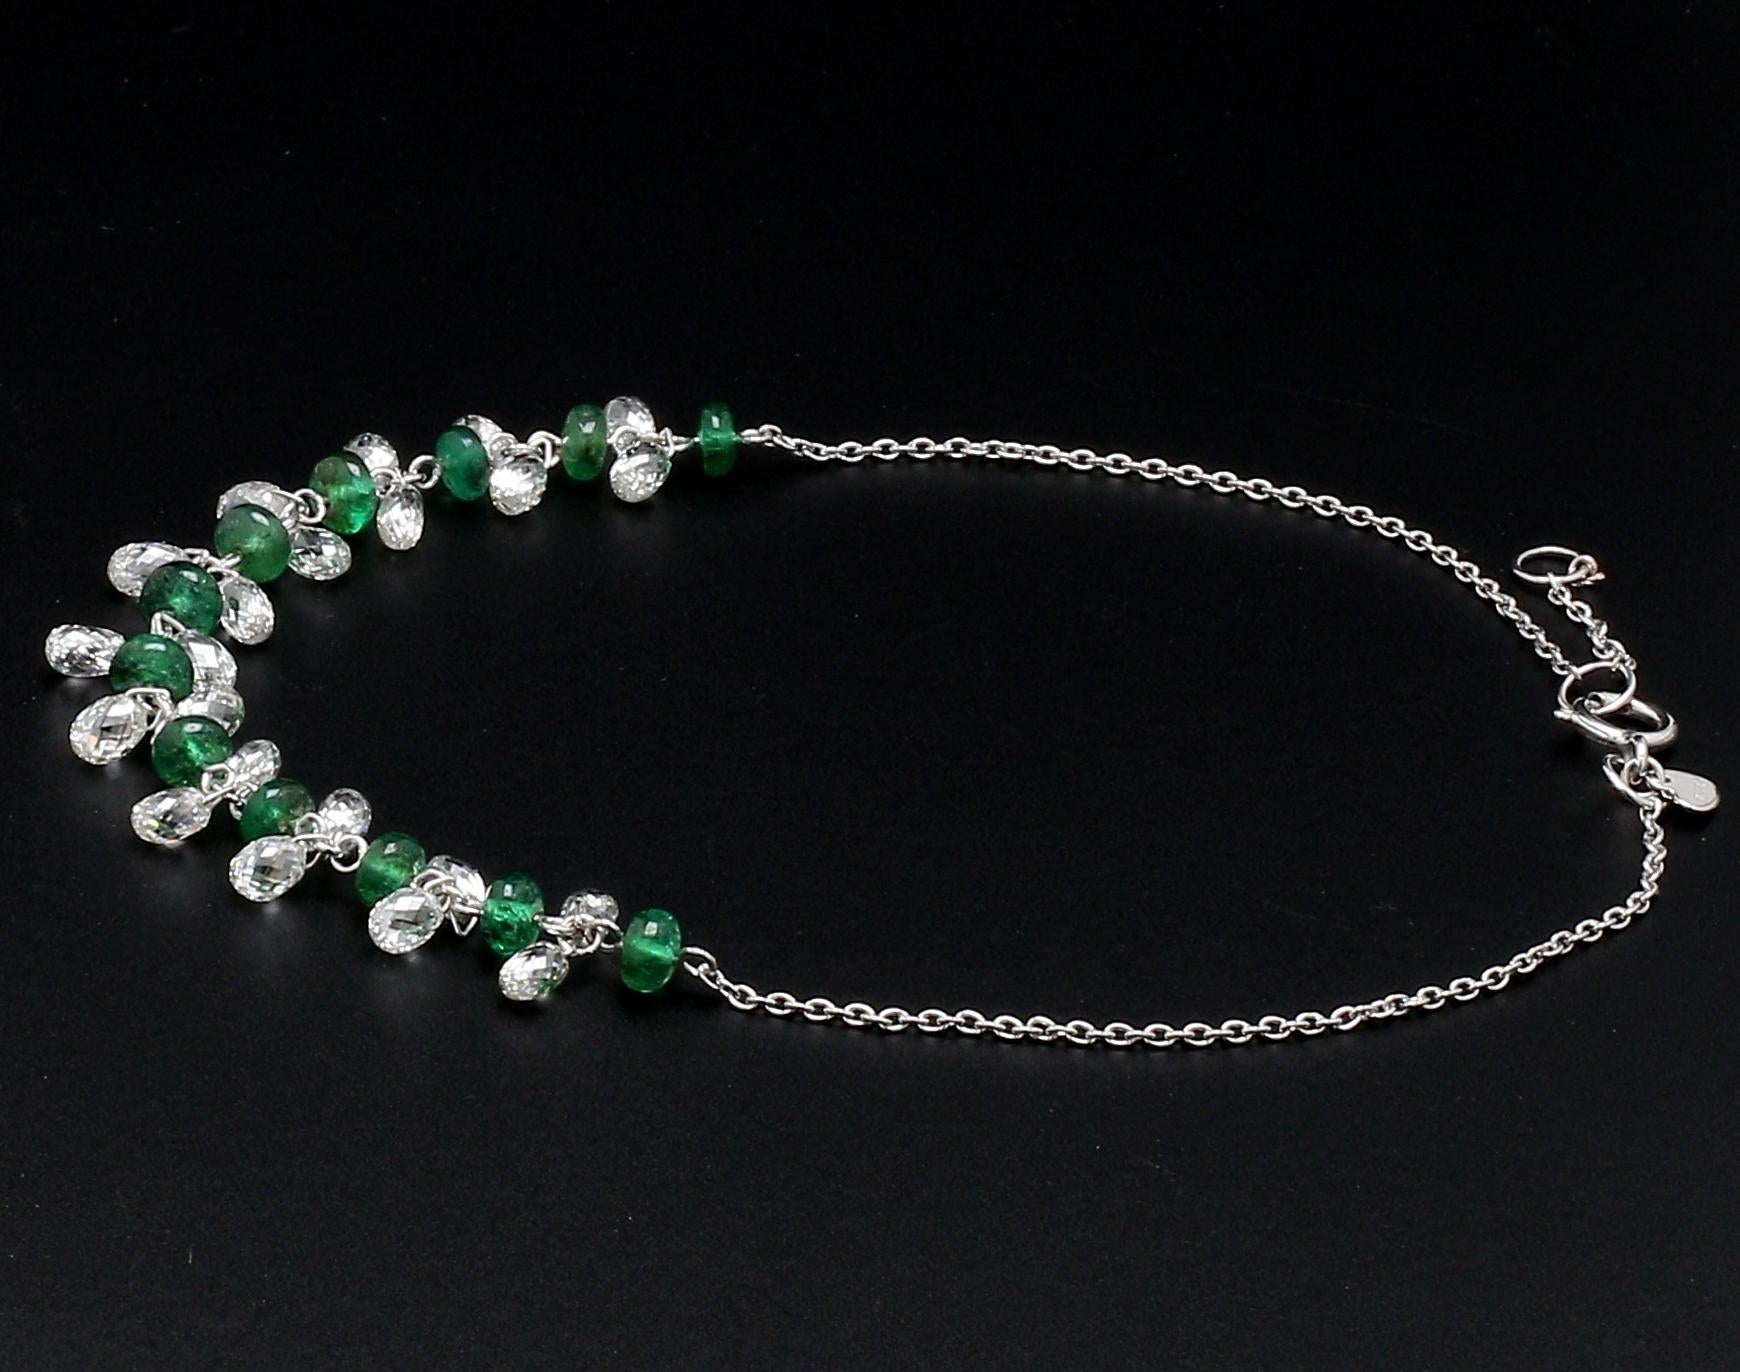 PANIM Diamond Briolette And Emerald 18K White Gold Dangling Bracelet

Our dangling briolette-cut diamond bracelet is extremely wearable. Its versatility and classic design make it a great accompaniment to various occasions. Beautifully made with